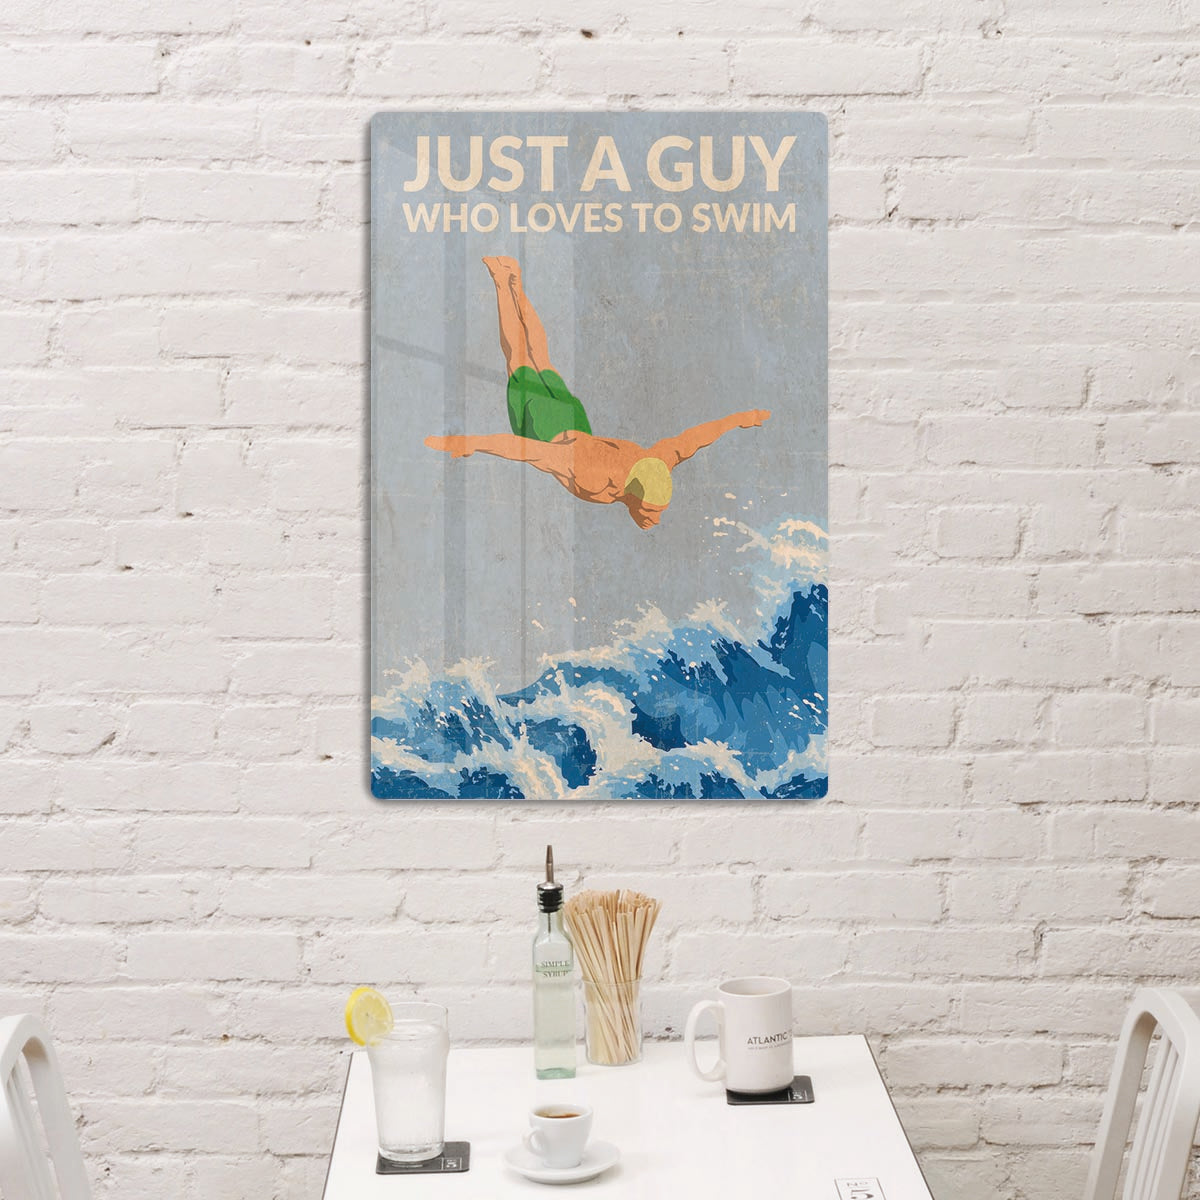 Just a Guy Who Loves To Swim green Acrylic Block - 1x - 3